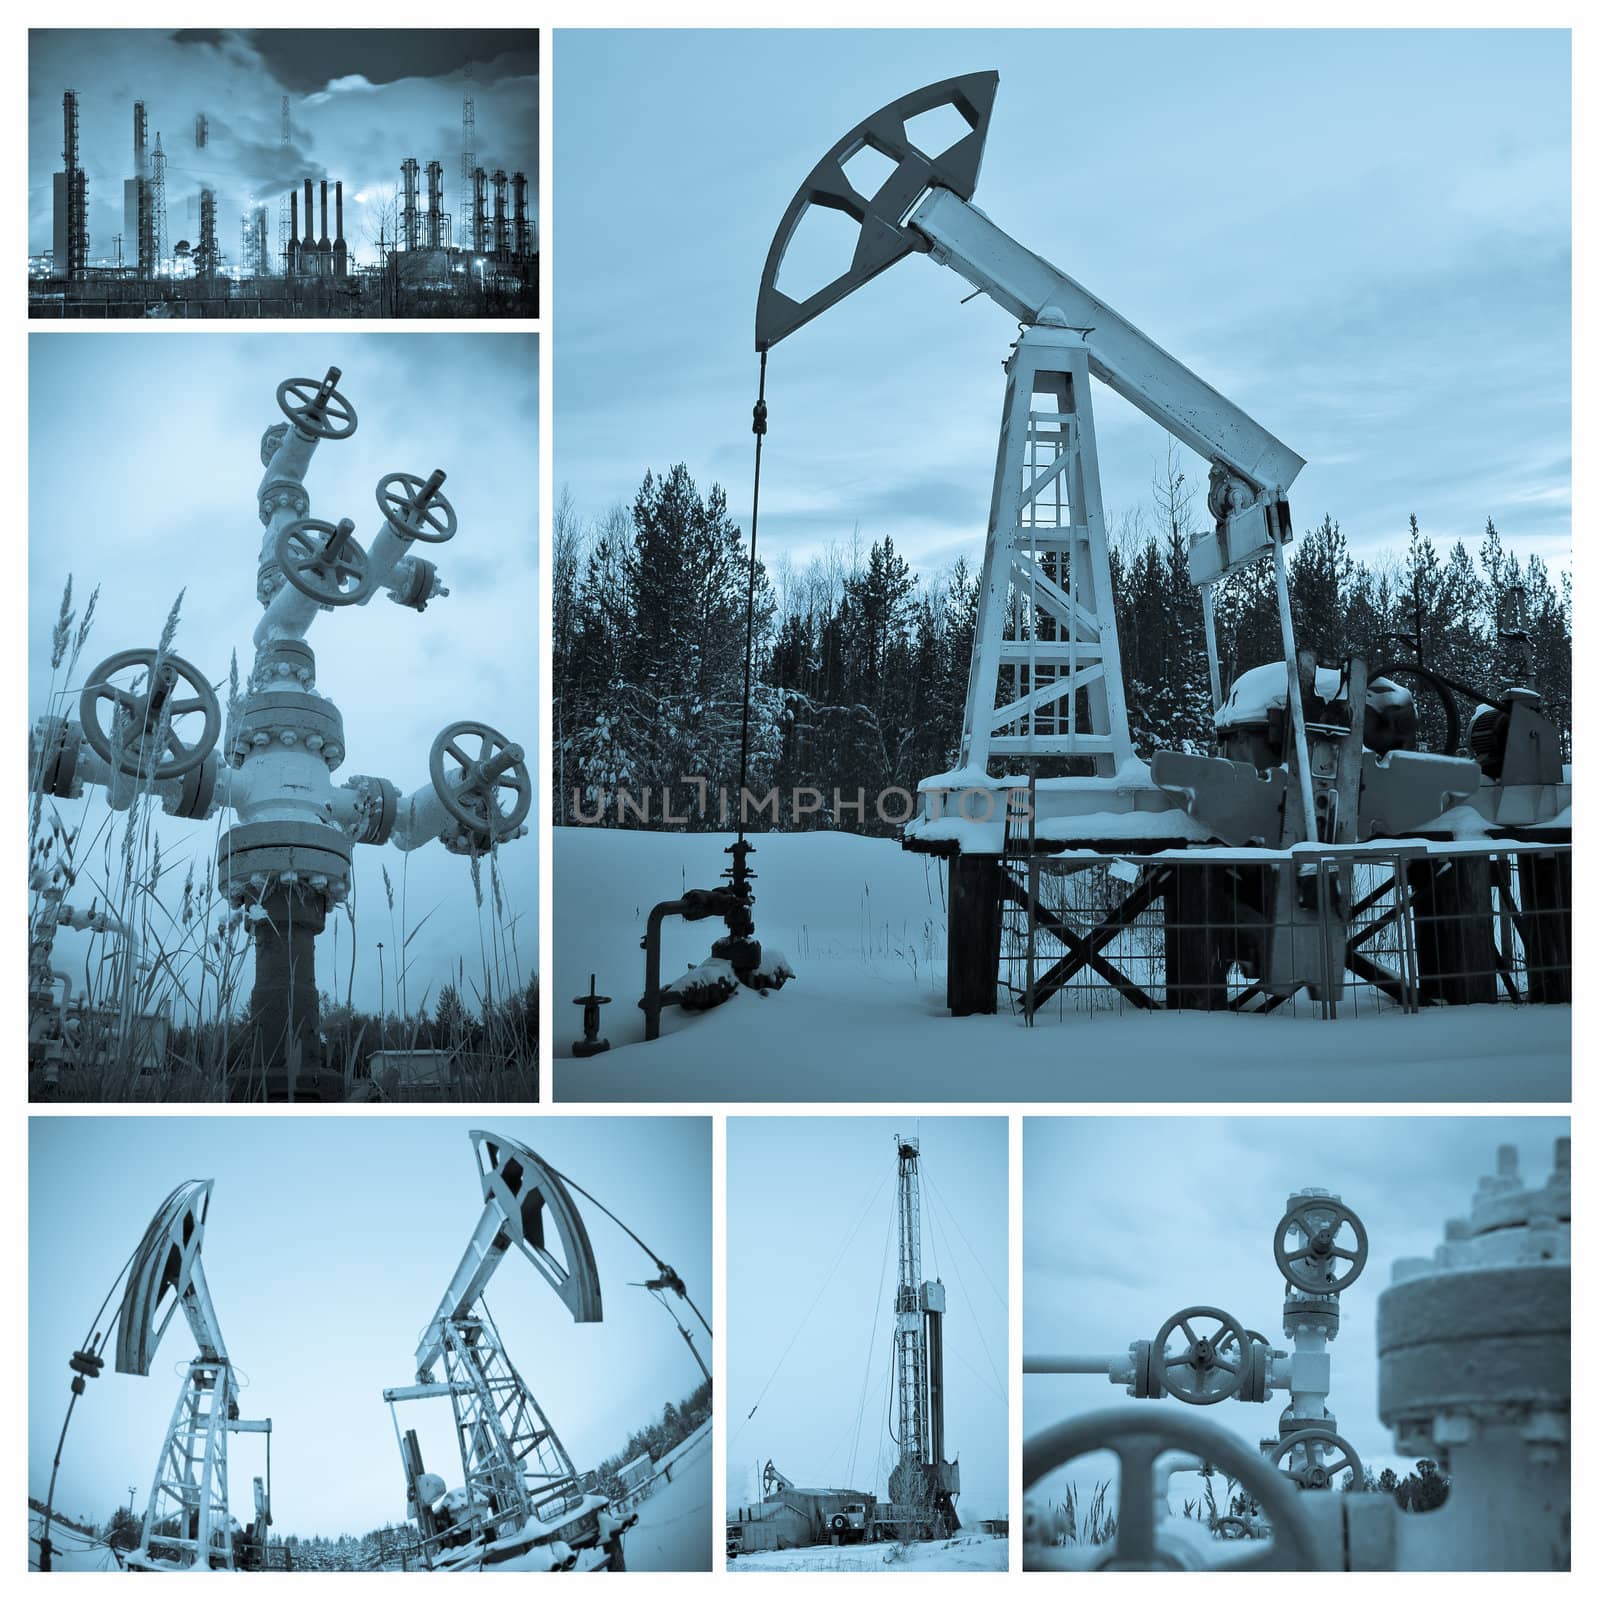 Oil and gas industry. Collage, monochrome, toned blue.